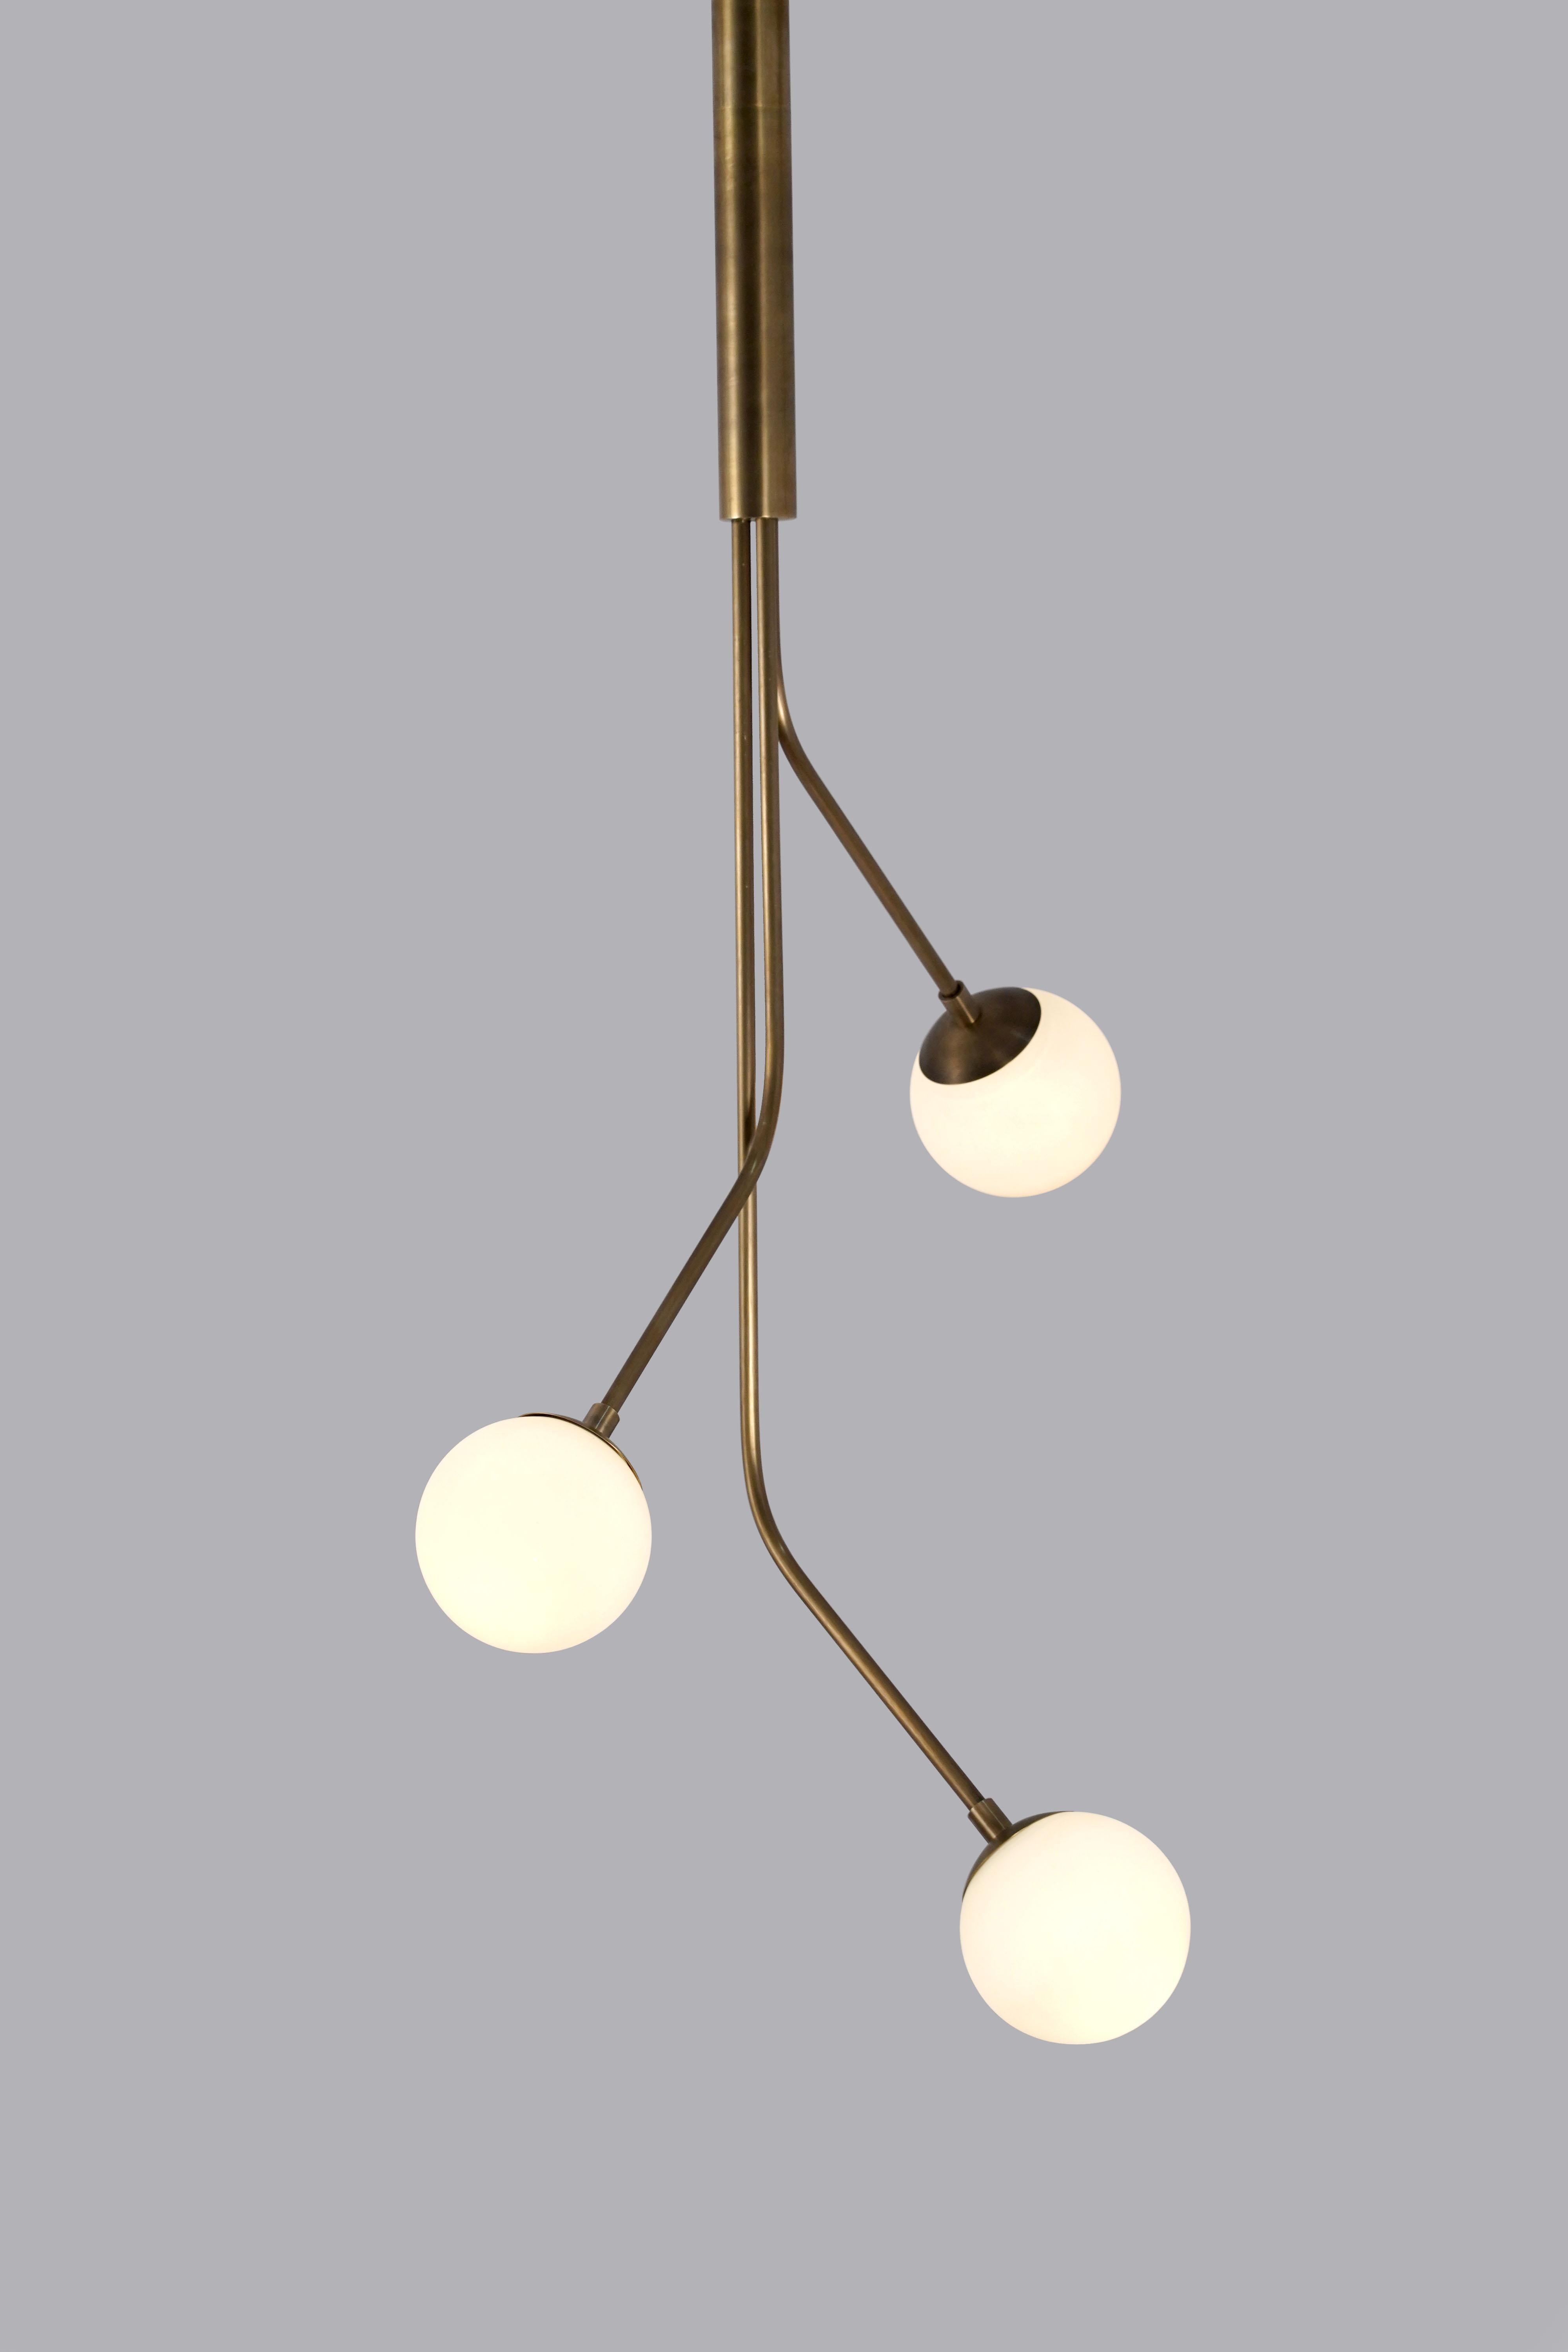 Rhythm 3 Glass Globe Pendant Lamp by Lamp Shaper
Dimensions: D 86.5 x W 86.5 x H 132 cm.
Materials: Brass and glass.

Different finishes available: raw brass, aged brass, burnt brass and brushed brass Please contact us.

All our lamps can be wired